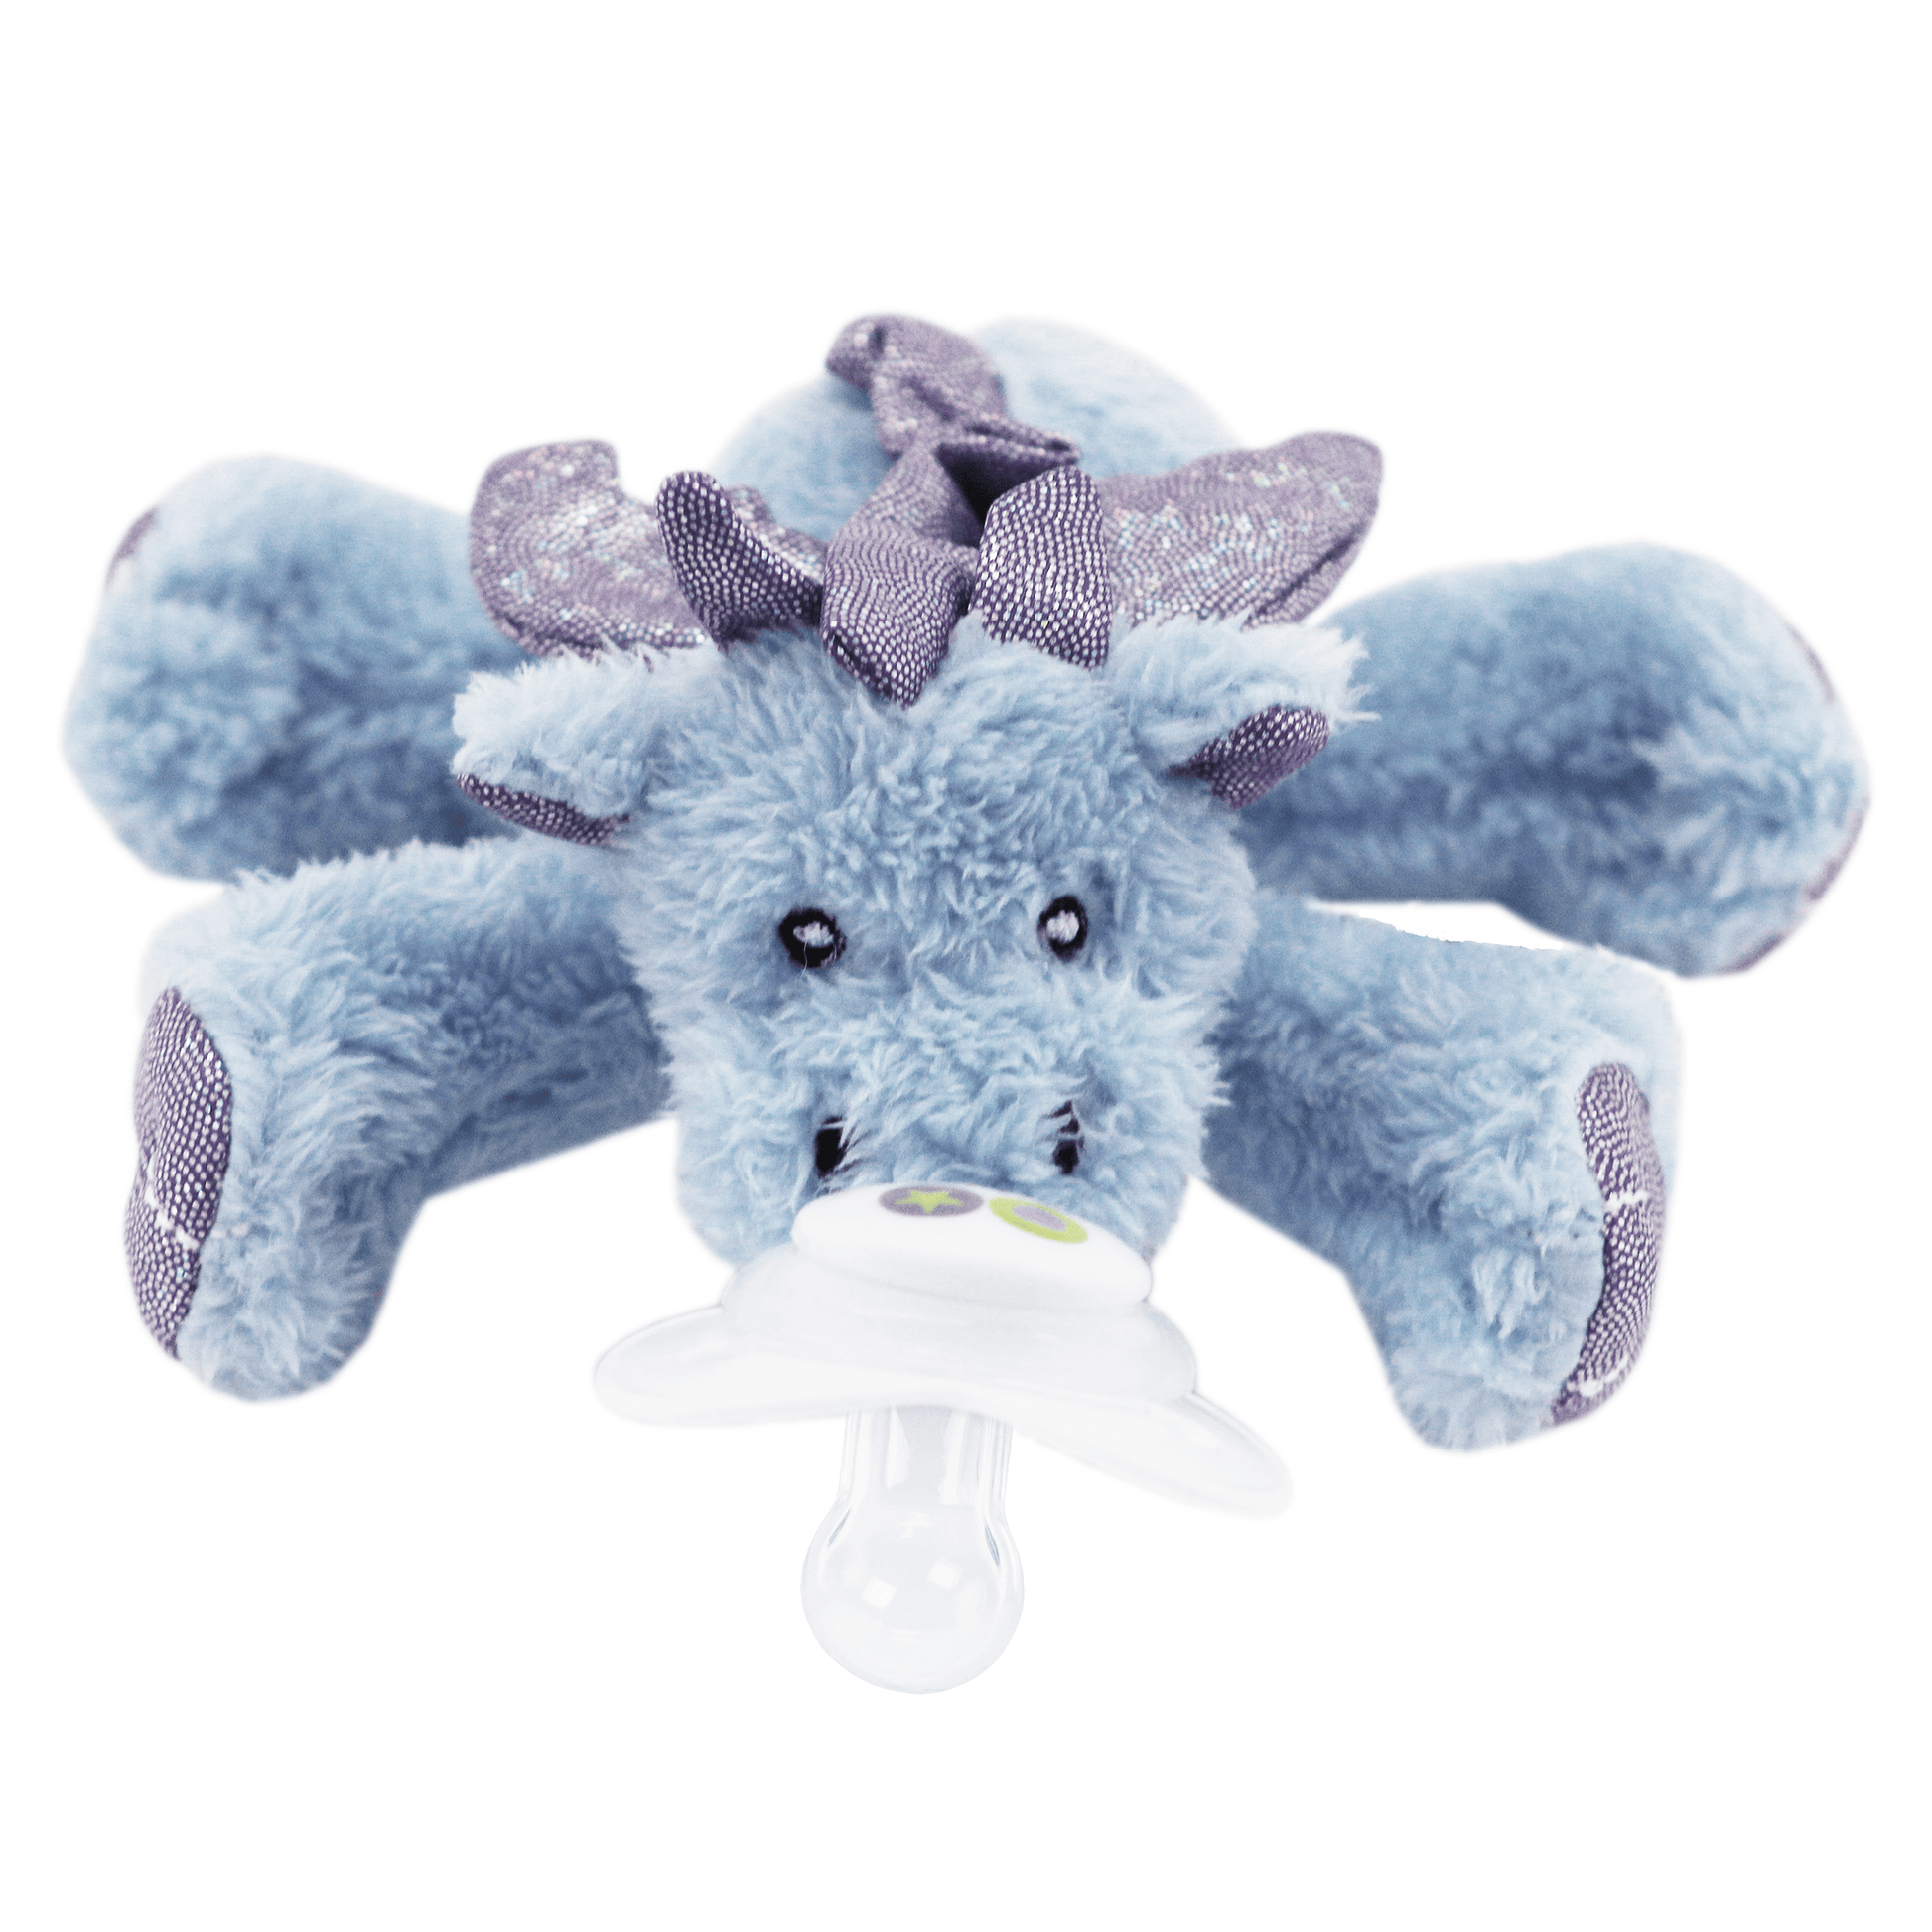 Nookums Paci-Plushies® Shakies - Dimples Dragon Nookums Paci-Plushies® Shakies - Dimples Dragon 